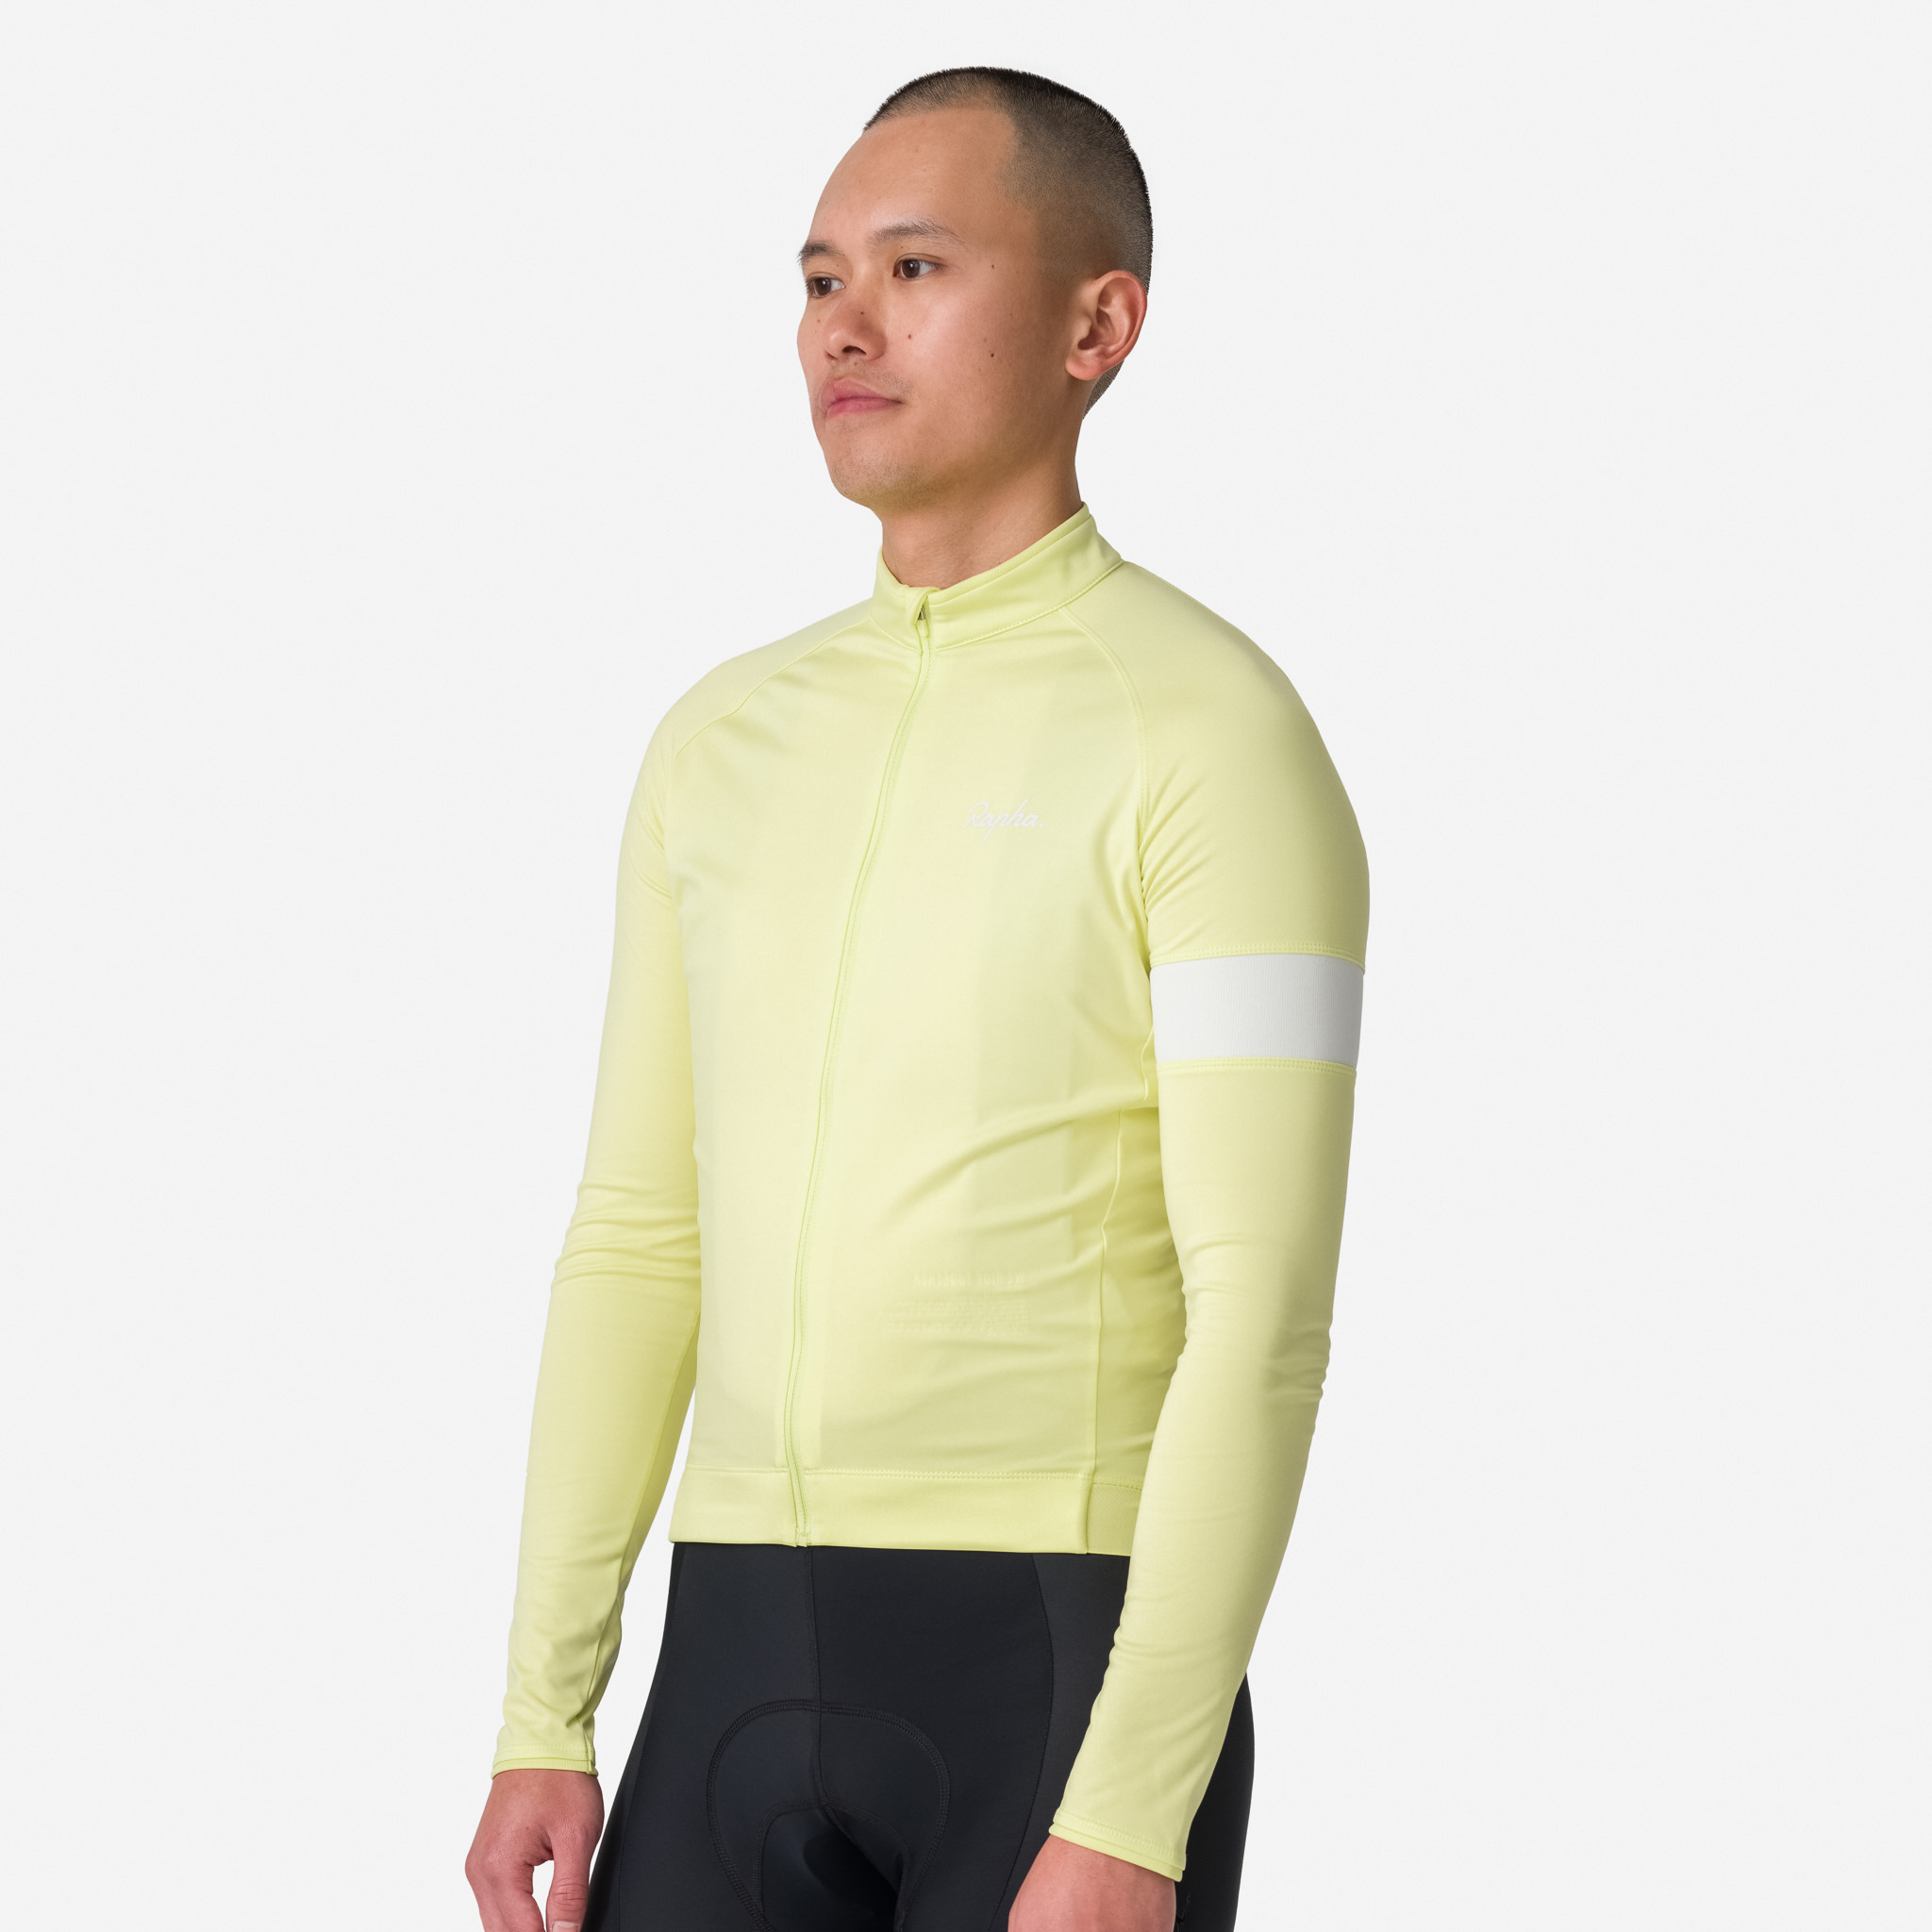 Rapha - Men's Long Sleeve Core Cycling Jersey - Faded Gold / White - Medium